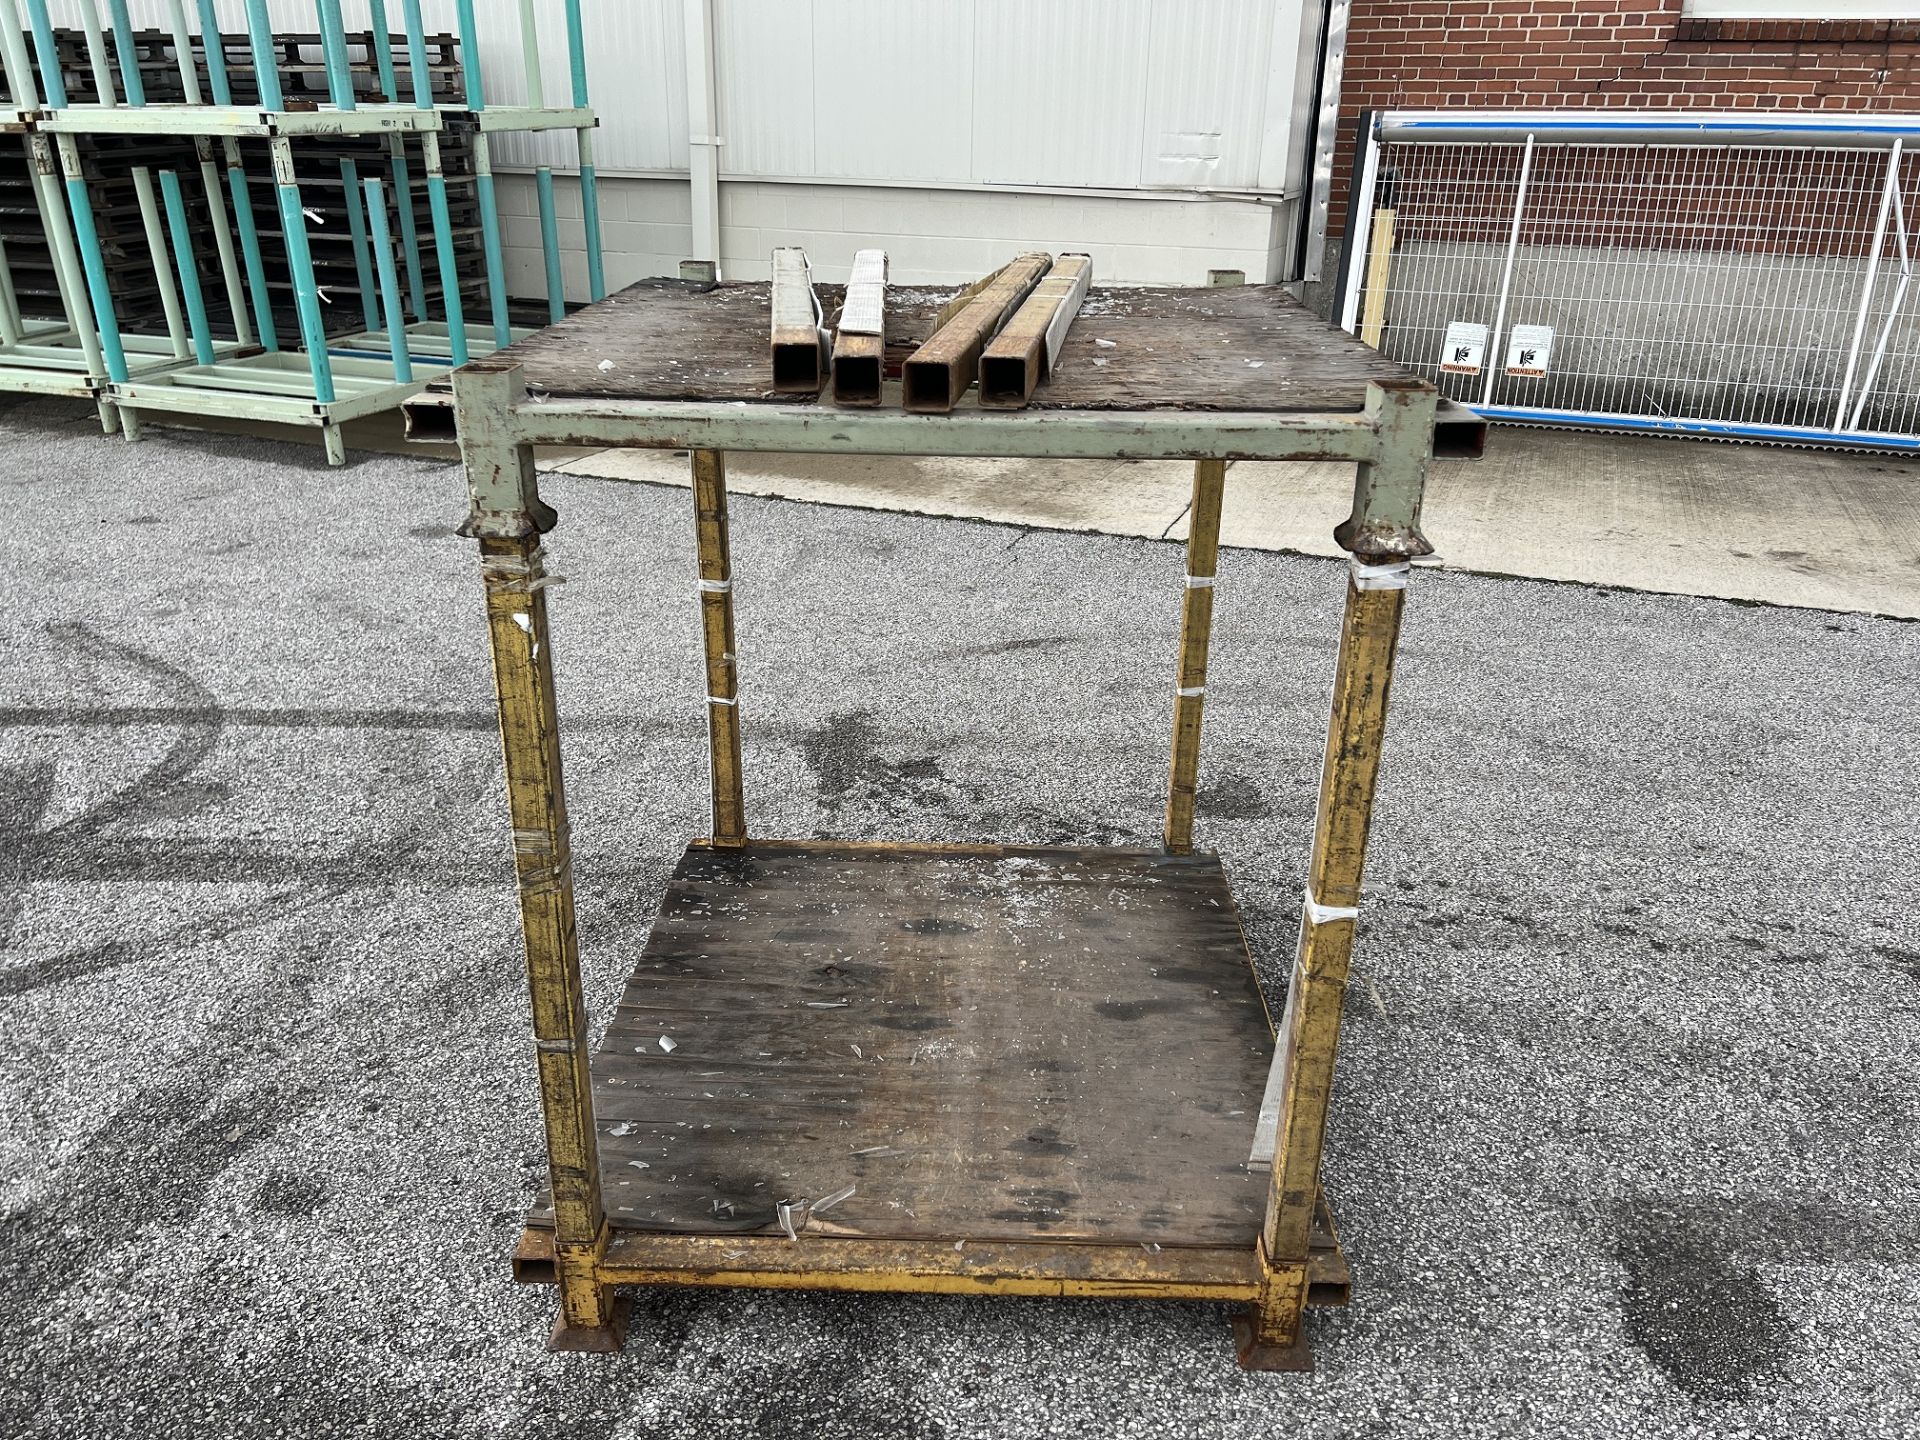 (22) STEEL FRAME STACKABLE PALLETS WITH REMOVABLE LEGS 48X53